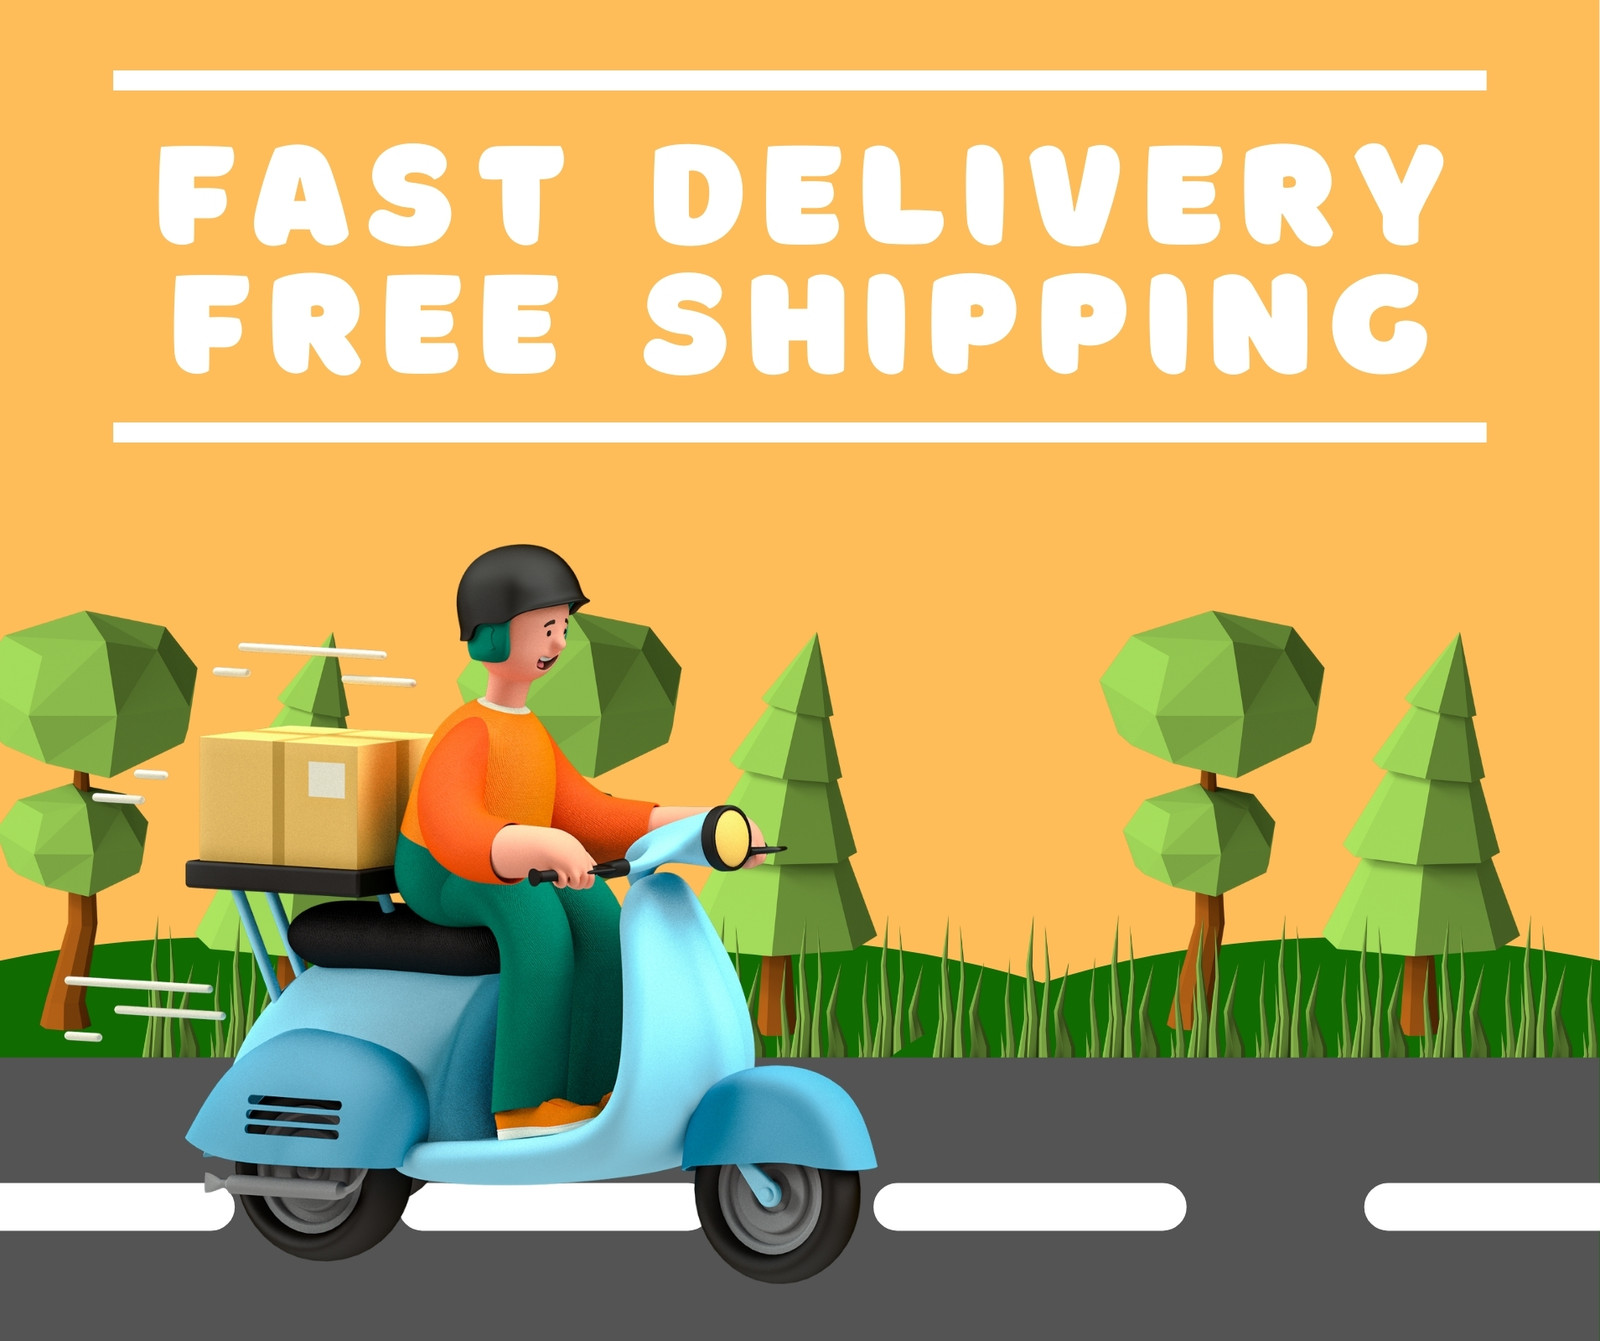 Home Delivery Typography Delivery Man Bringing Stock Vector (Royalty Free)  1715043193 | Shutterstock